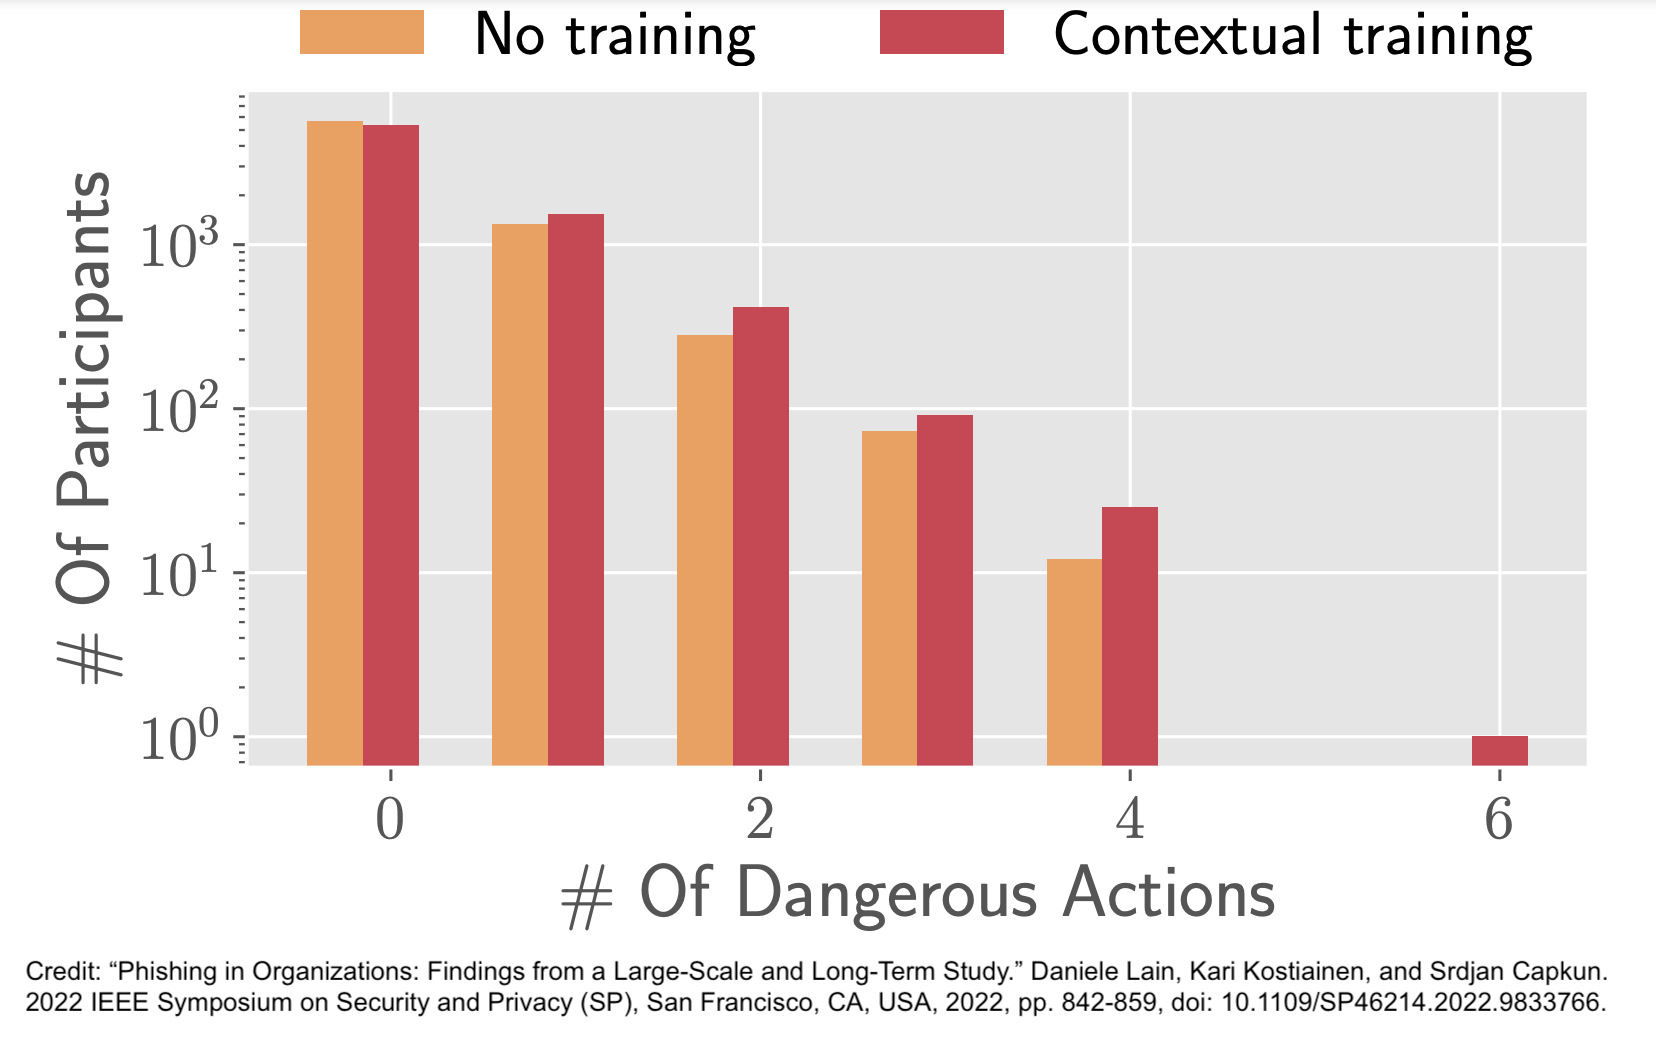 Large scale study on phishing susceptibility over time indicates phishing simulations combined with contextual training actually lead to employees taking more dangerous actions in response to phishing emails.